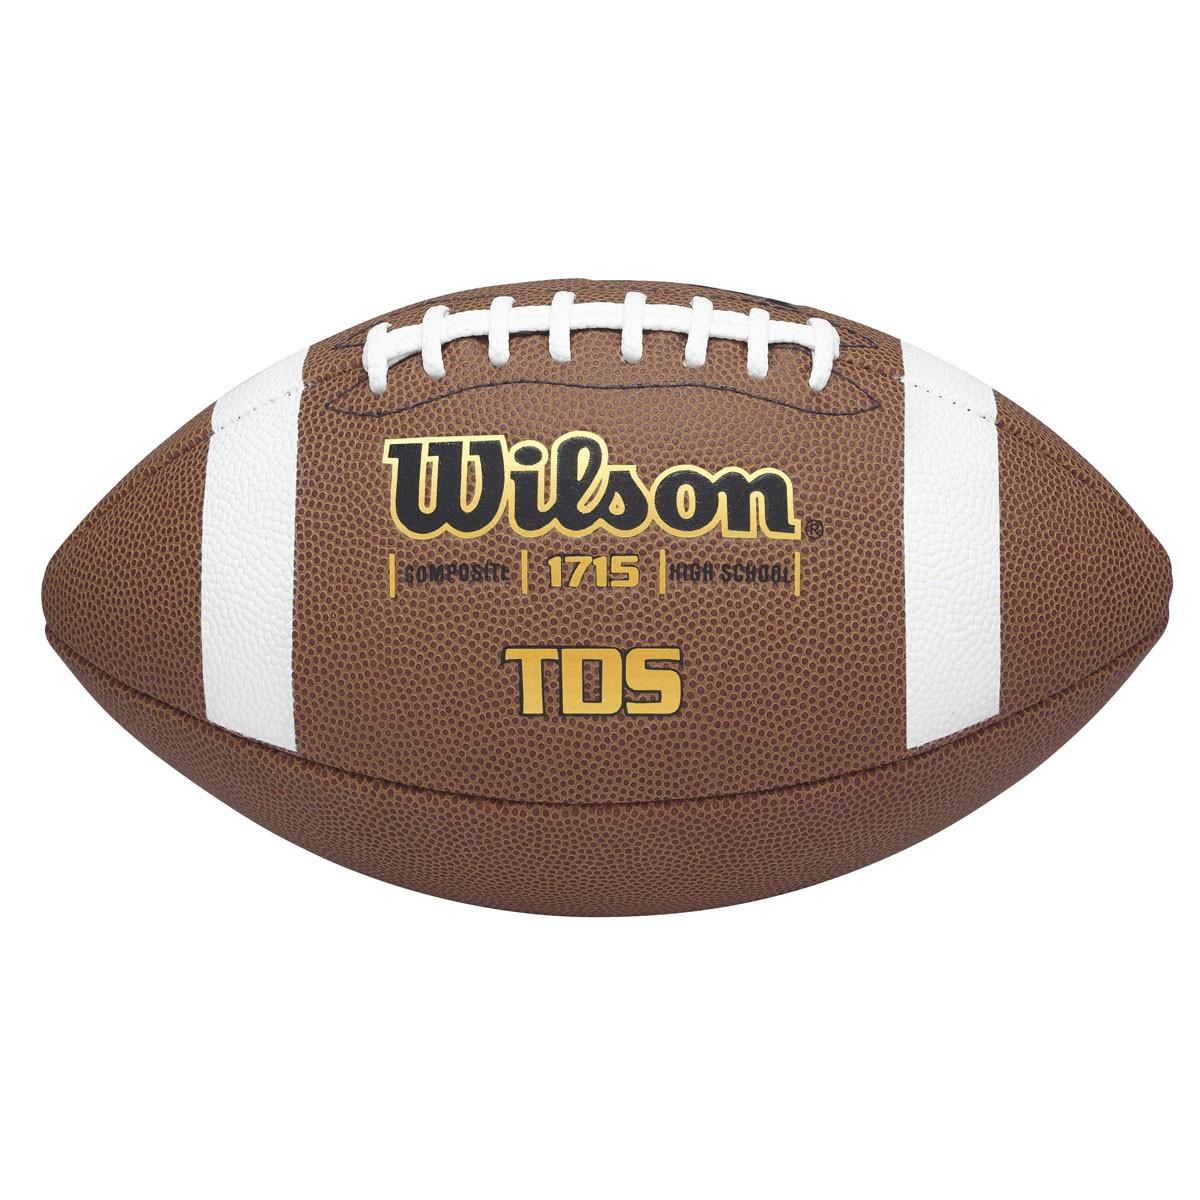 TDS Composite Football - Official Size